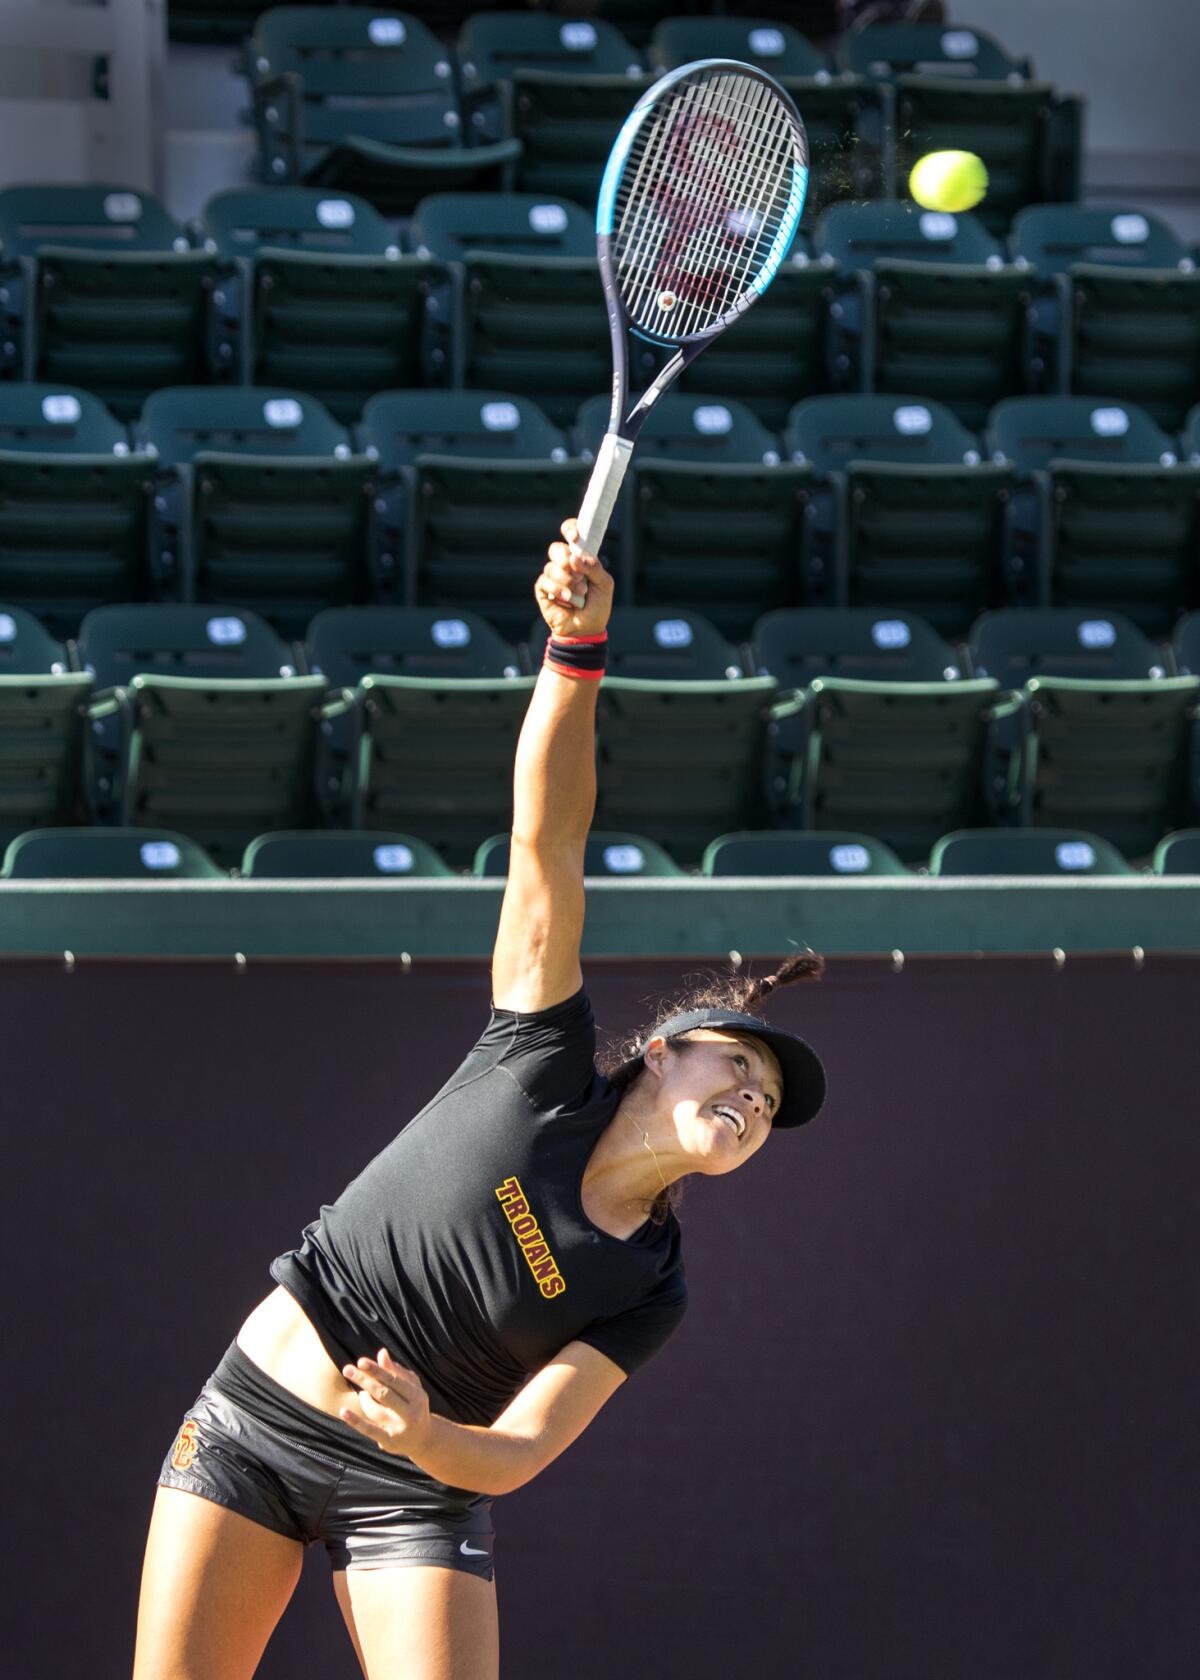 USC tennis player Angela Kulikov serves the ball during a doubles game at USC.